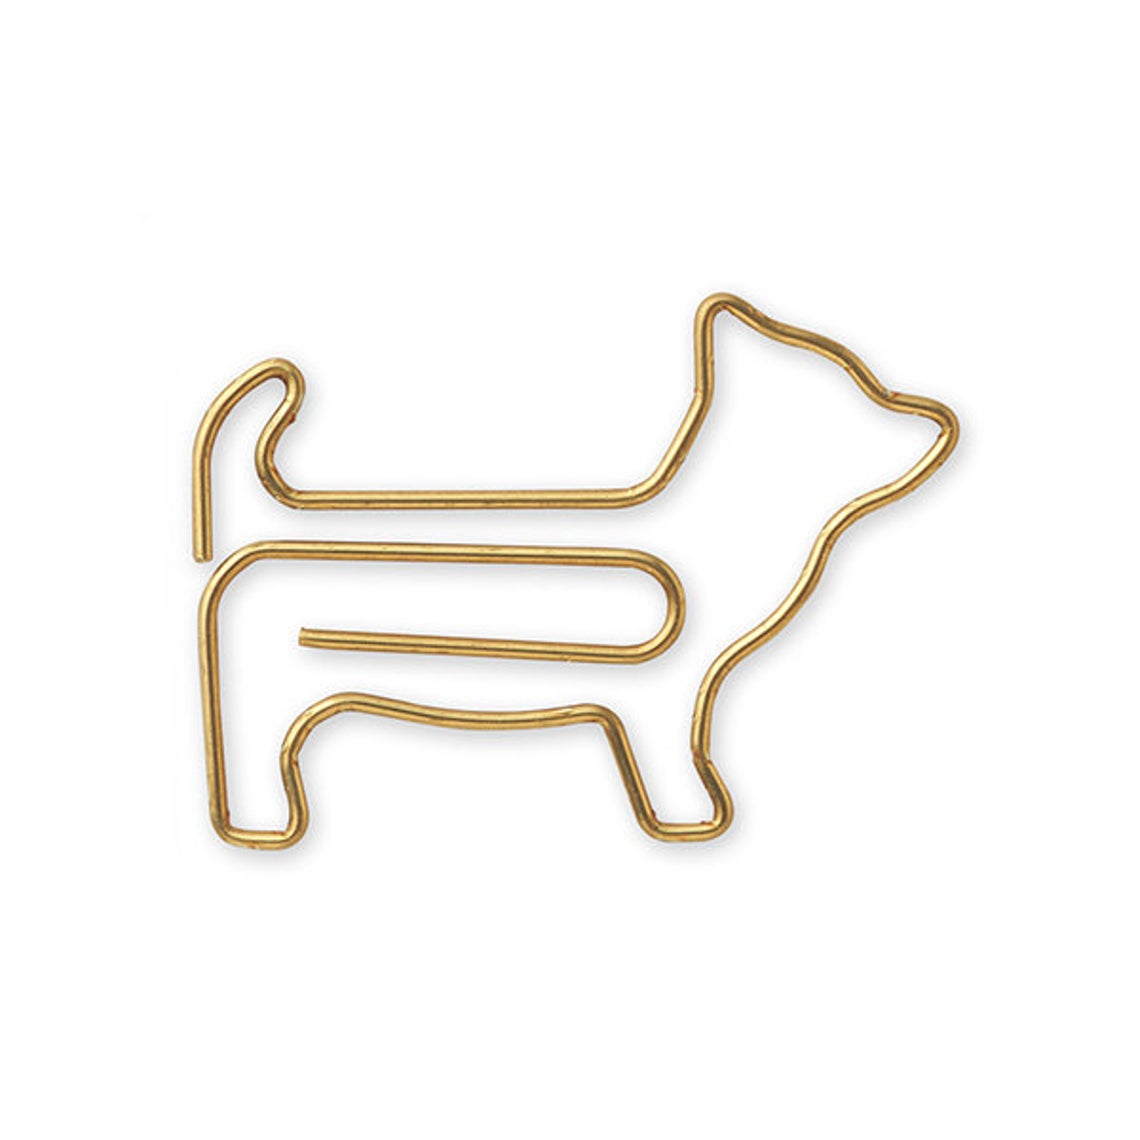 Sets of 12 Chihuahua Dog Paper Clips